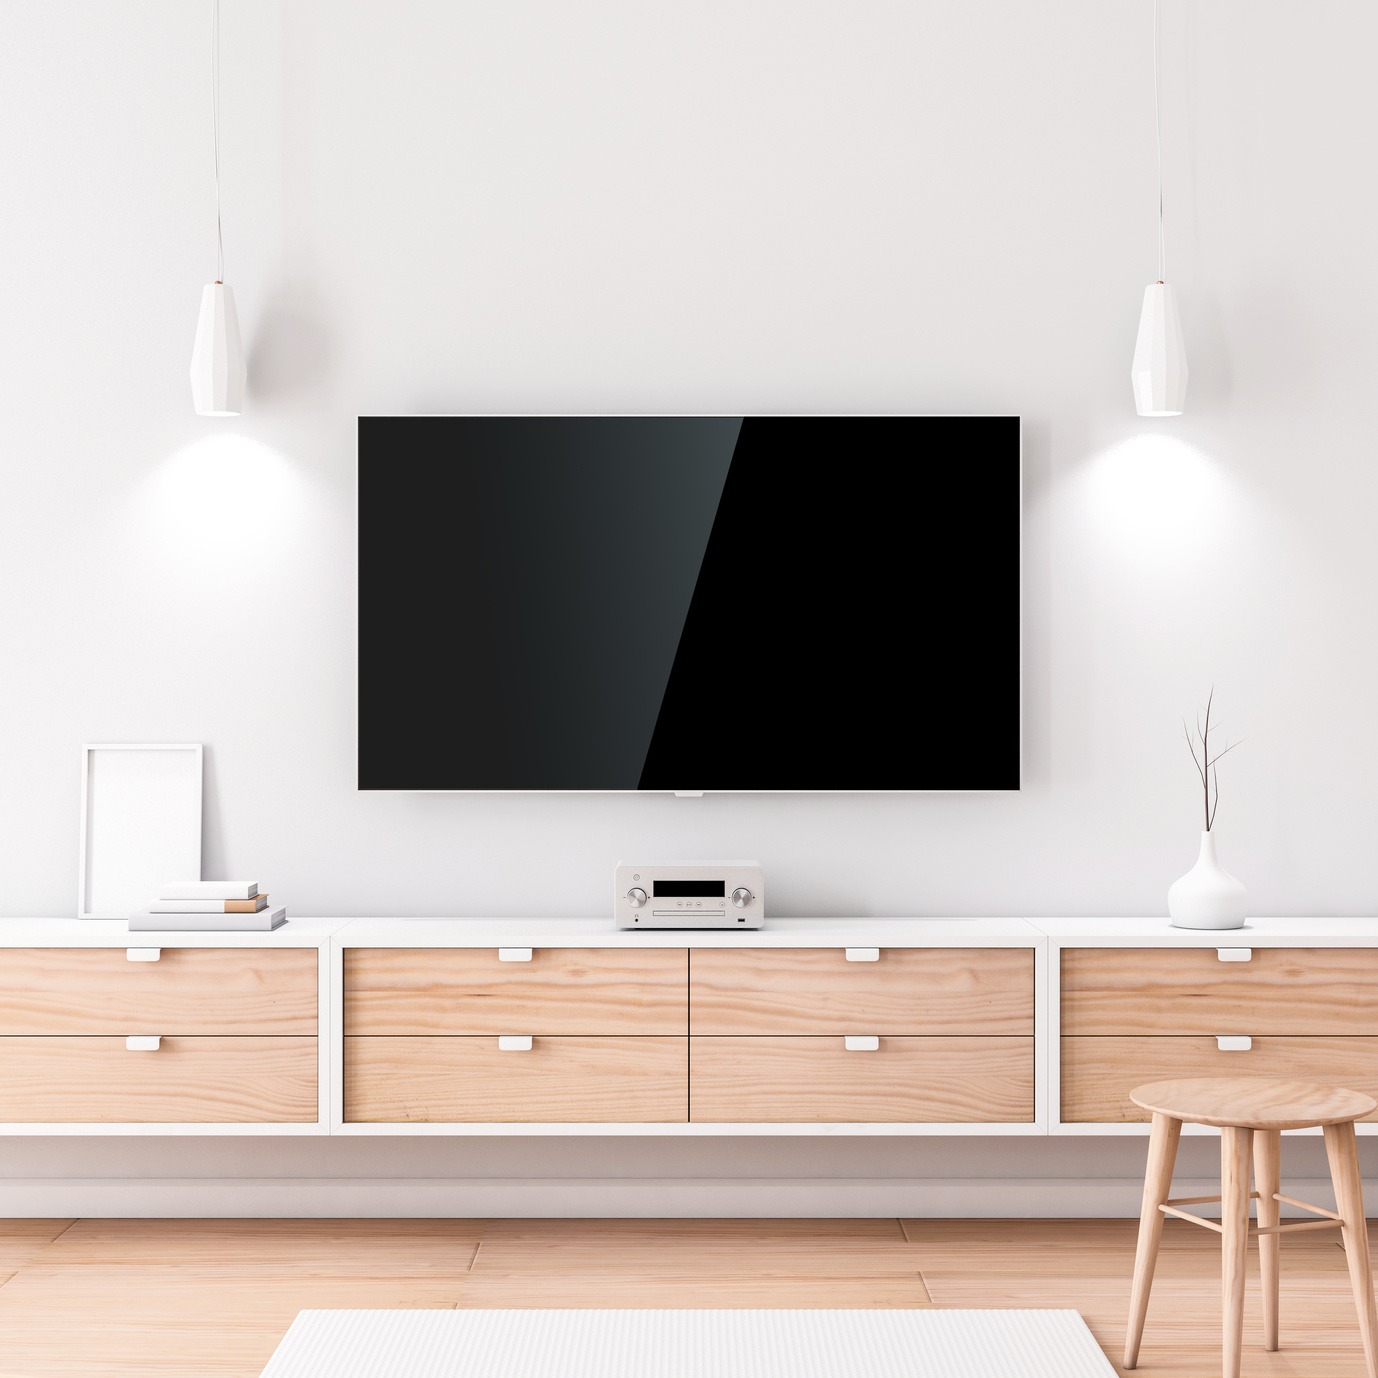 Smart Tv Mockup with black screen hanging on the white wall in modern living room. 3d rendering